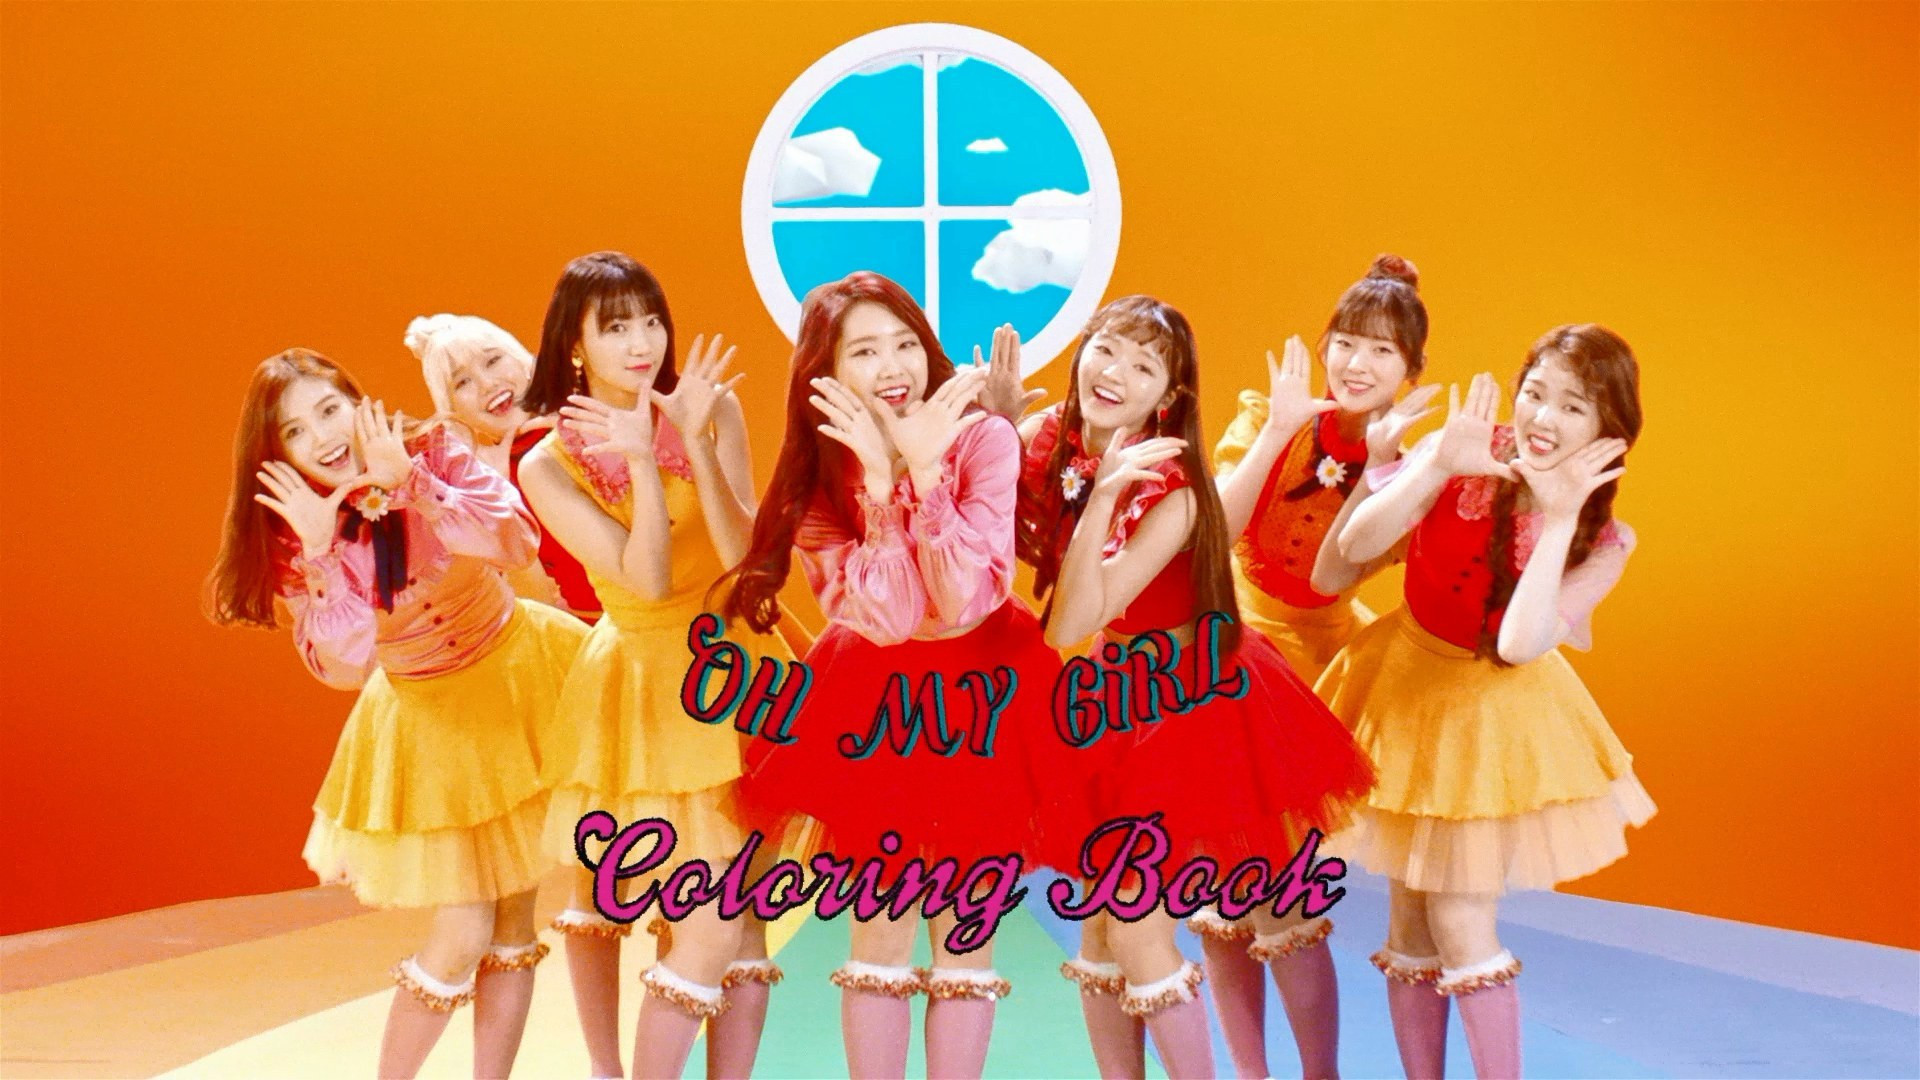 Coloring Book Oh My Girl Lyrics
 Oh My Girl Coloring Book who s who K Pop Database